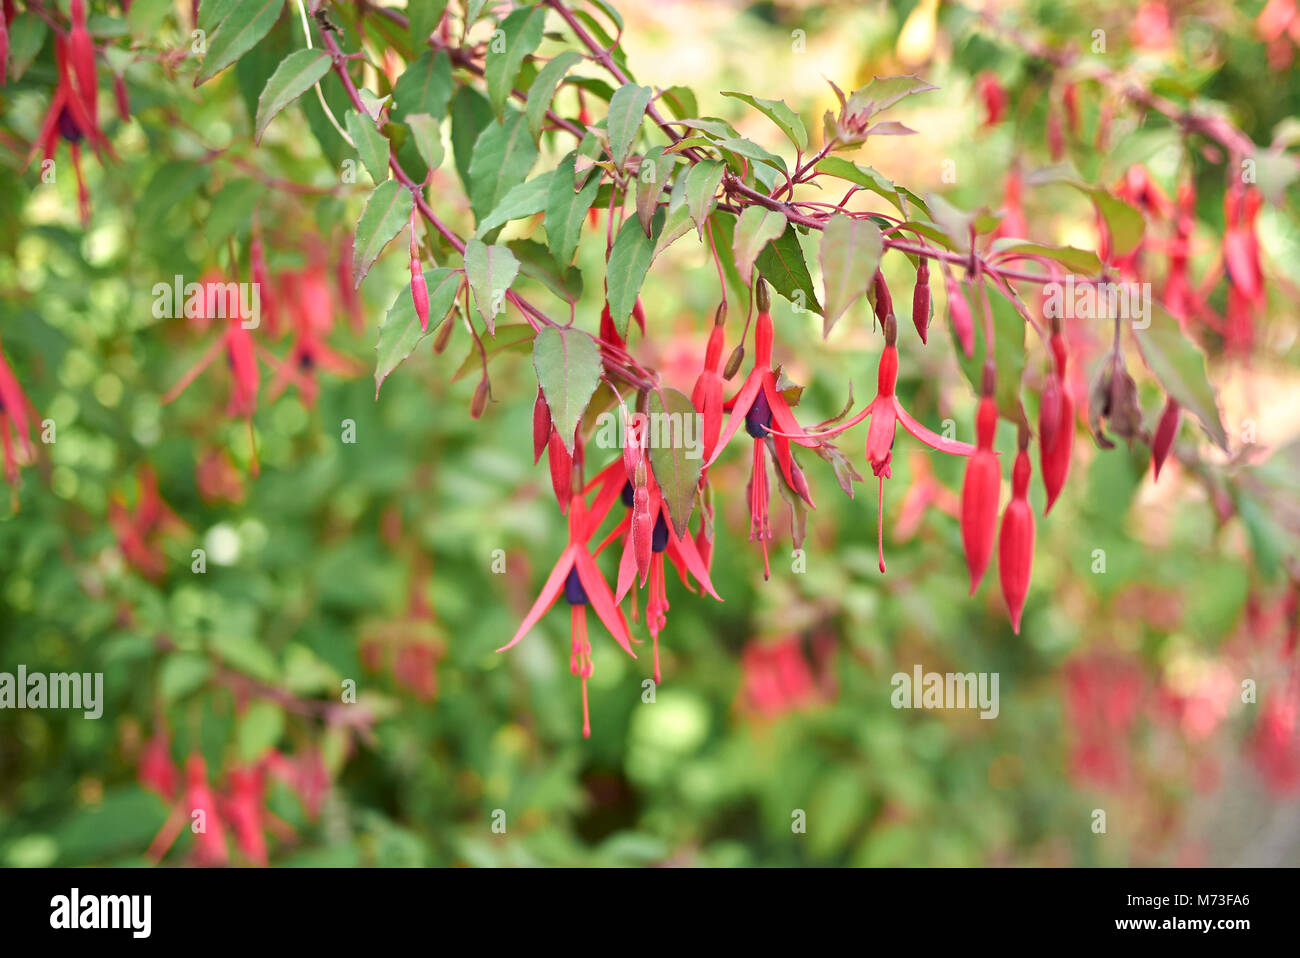 Fuchsia 'riccartonii' High Resolution Stock Photography and Images - Alamy